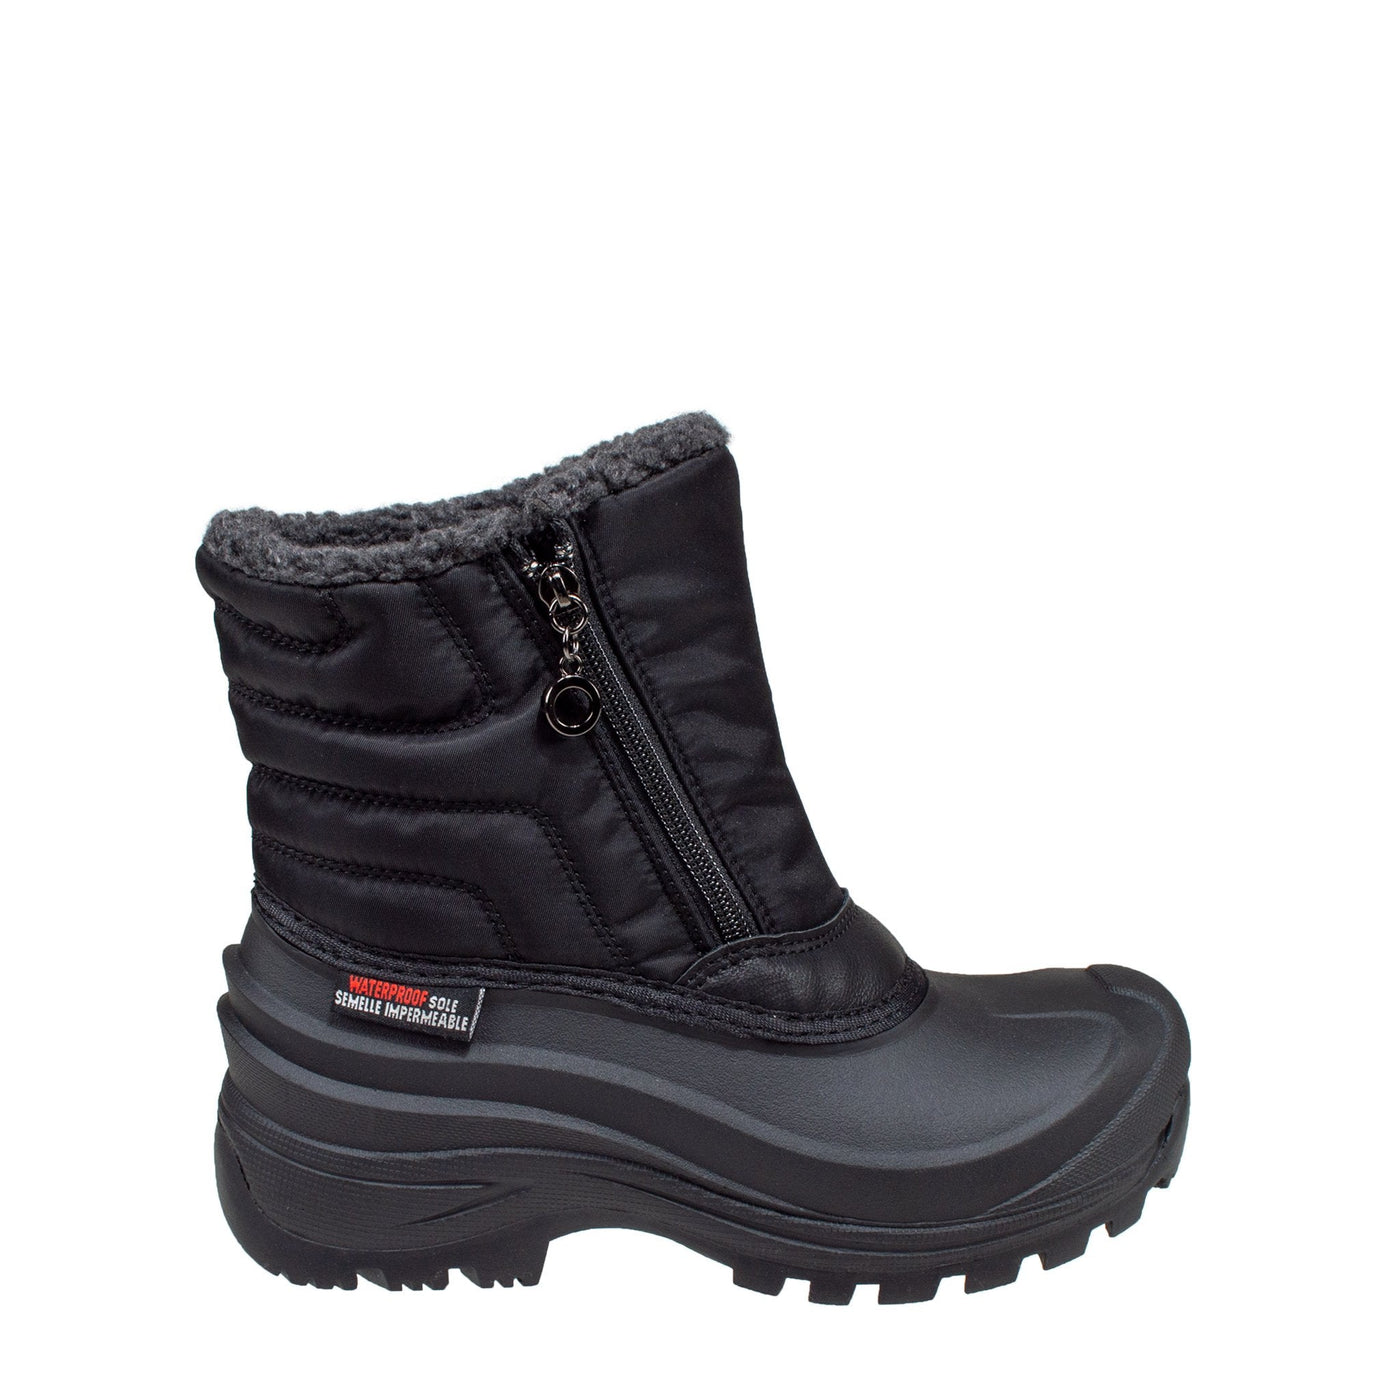 black insulated women's winter boots